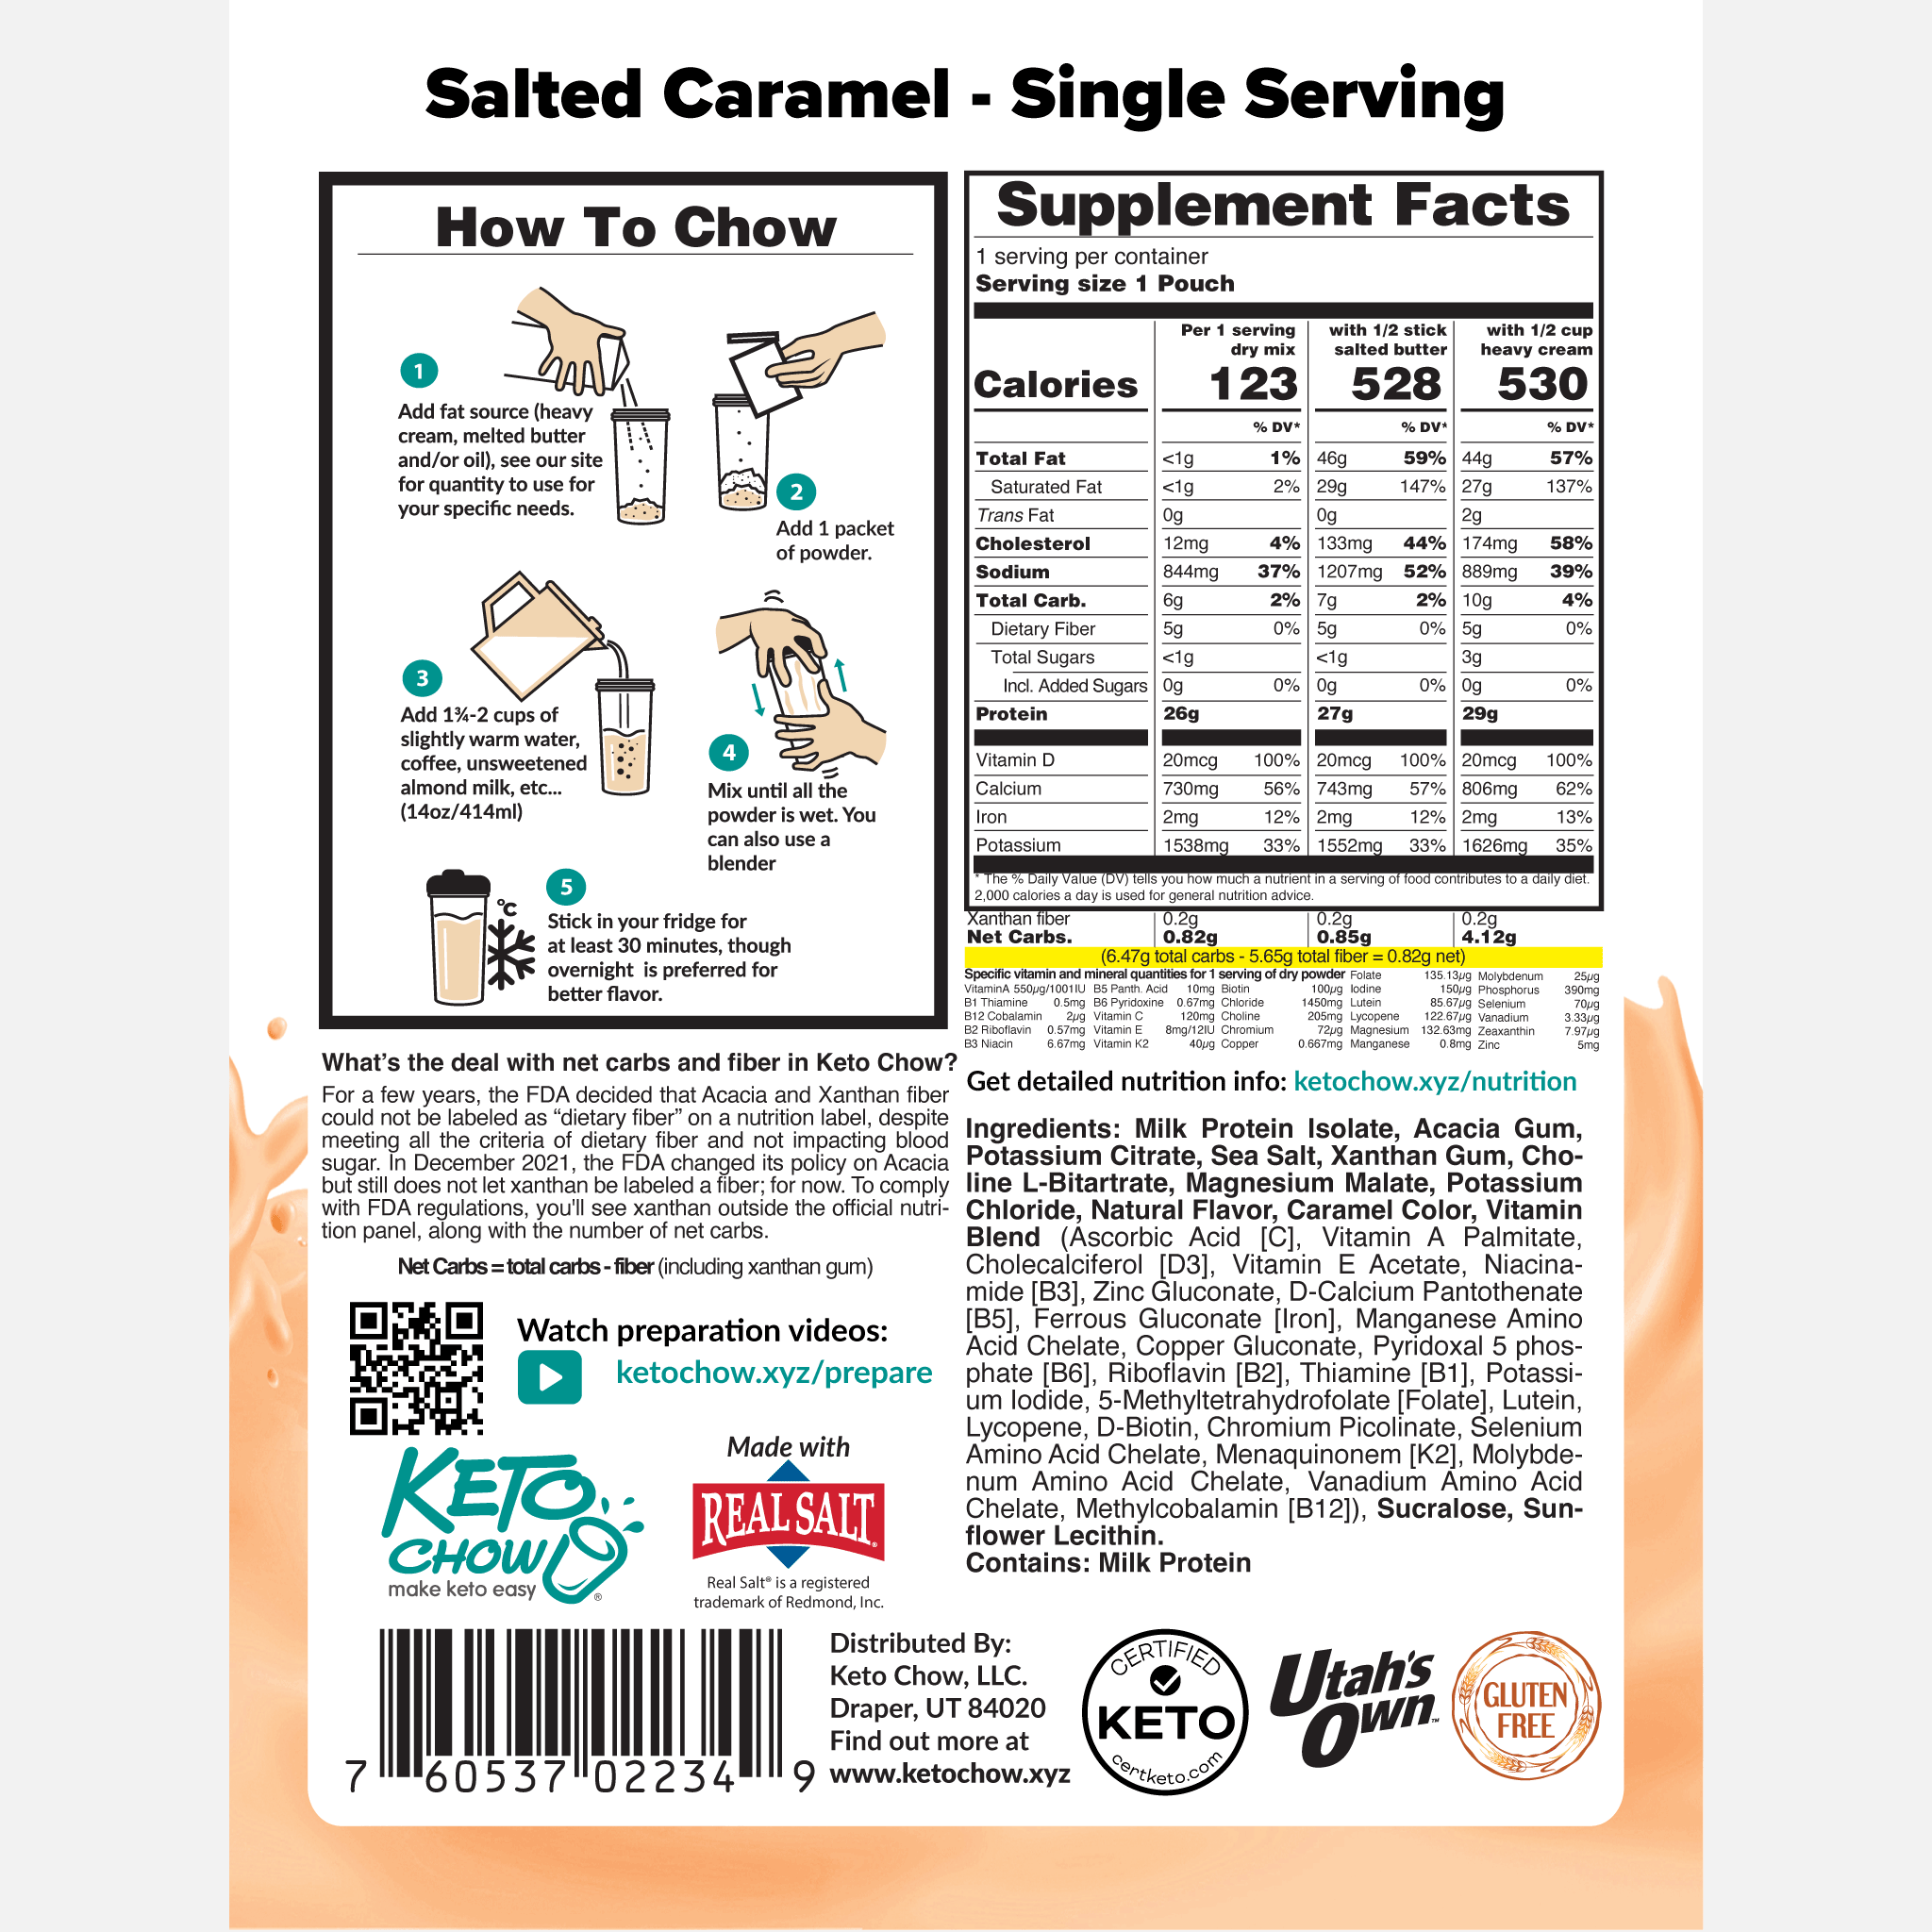 Salted Caramel Keto Chow package back